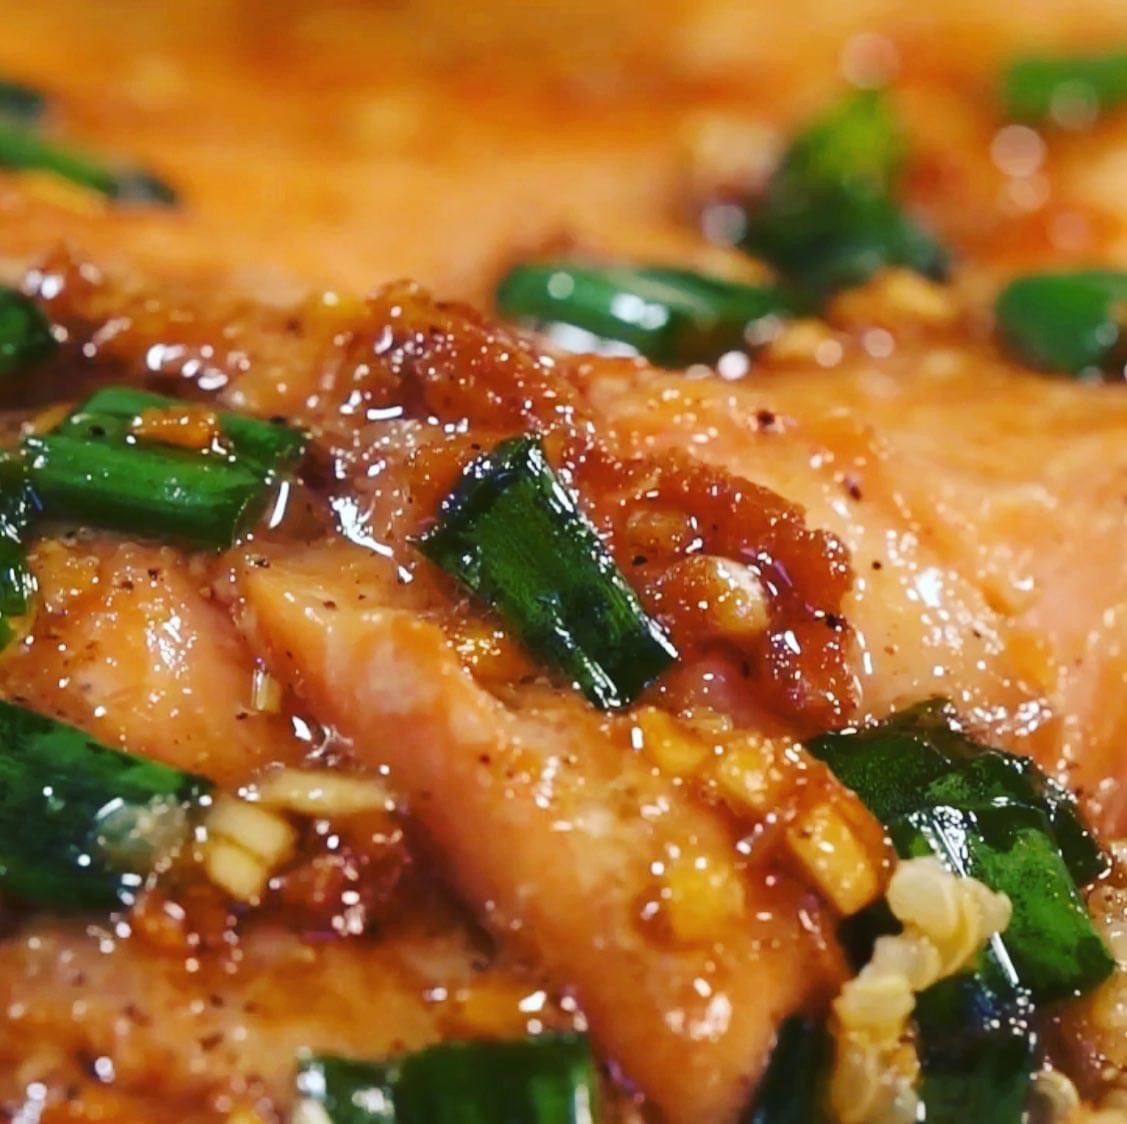 Easy One Pot Meal - Steamed Salmon in Ginger Soy Sauce